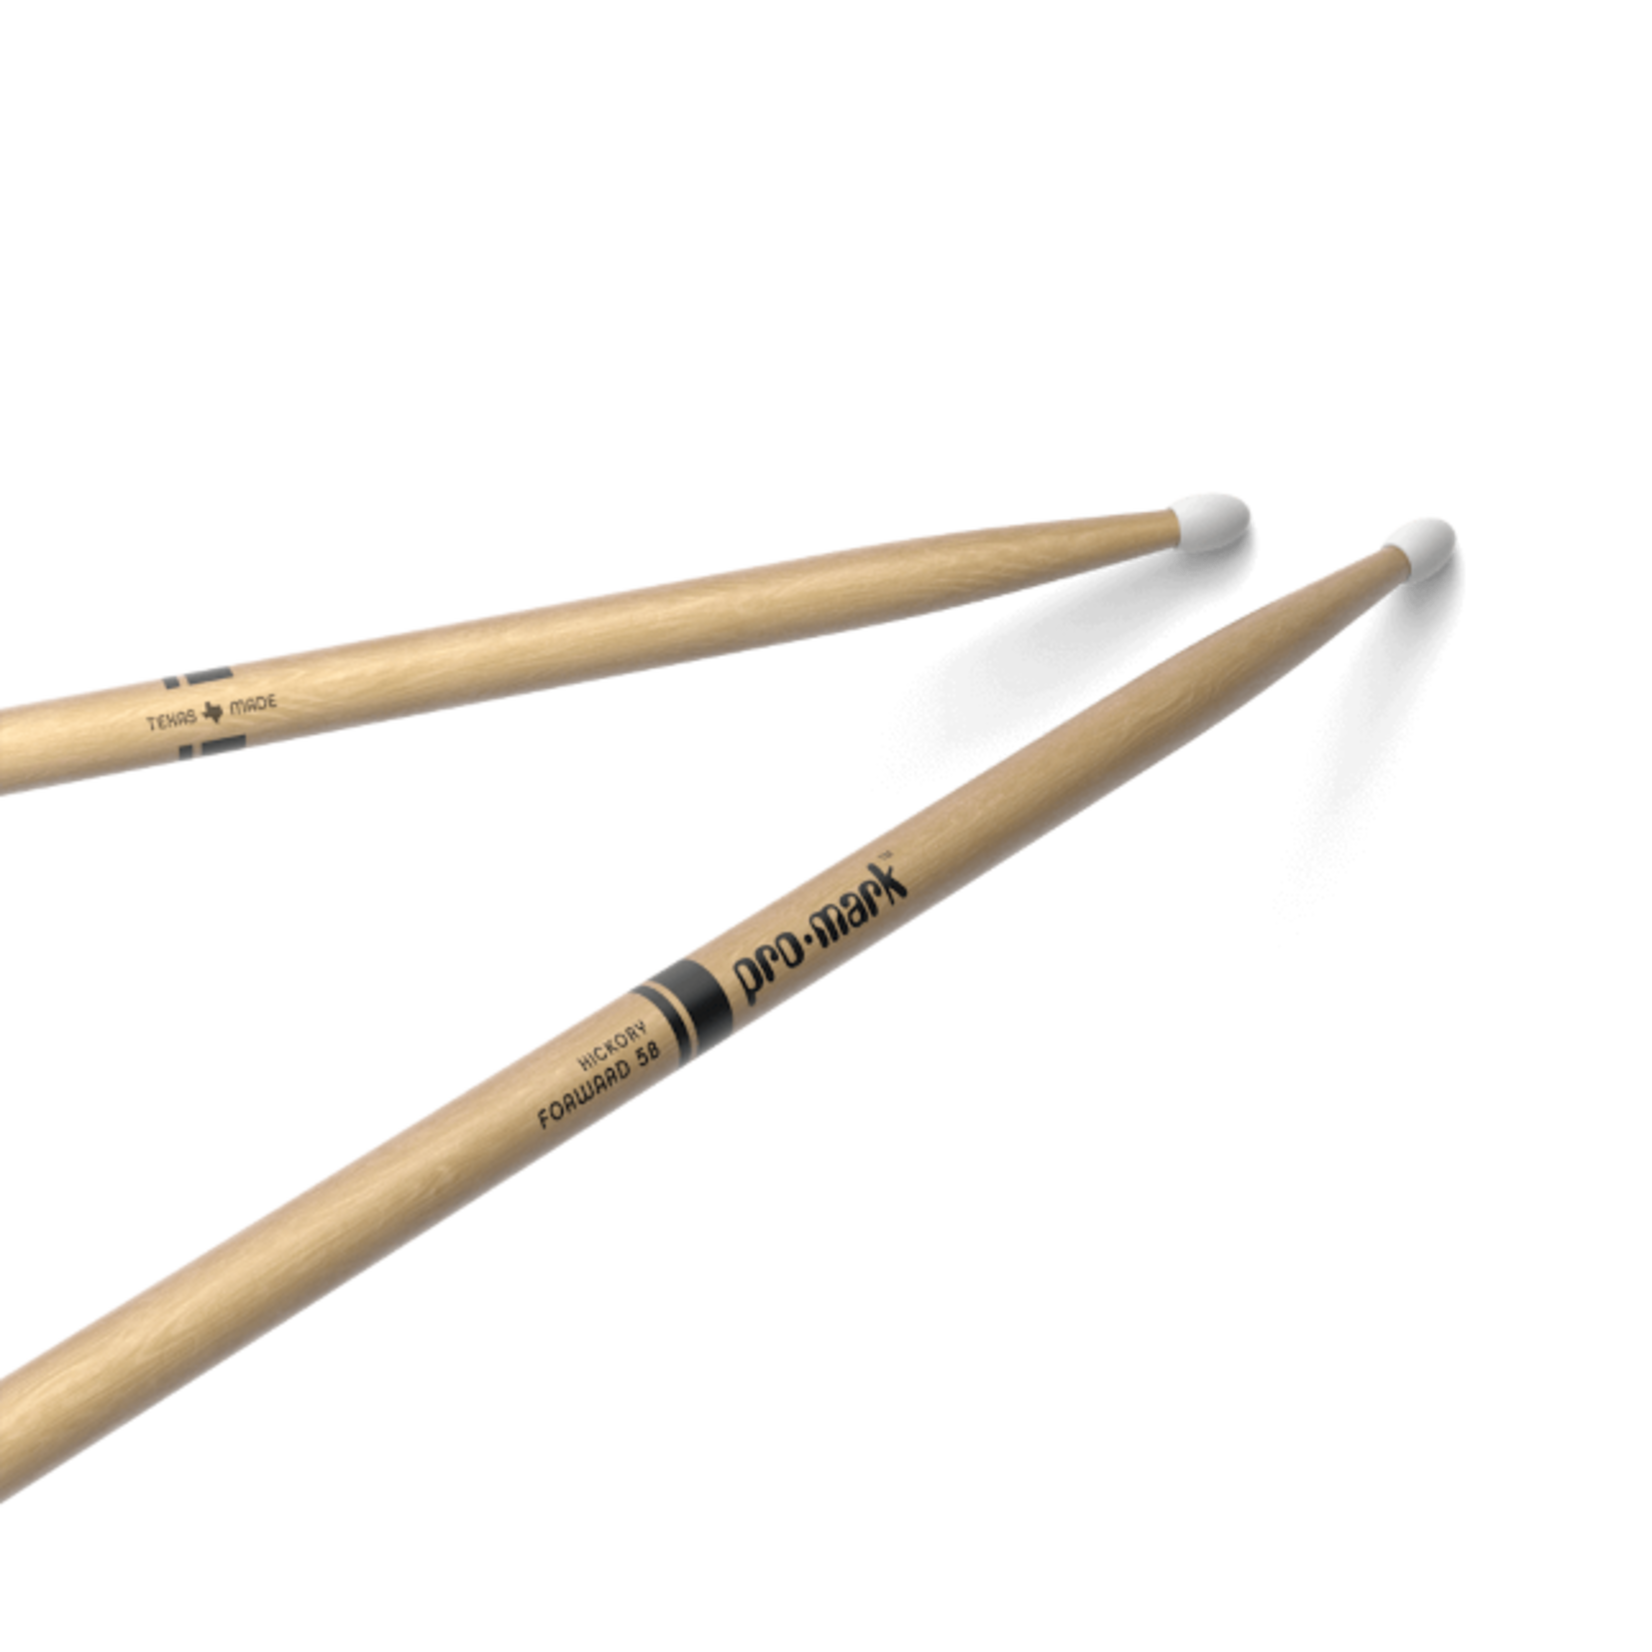 Promark Classic Forward 5B Hickory Drumstick, Oval Nylon Tip